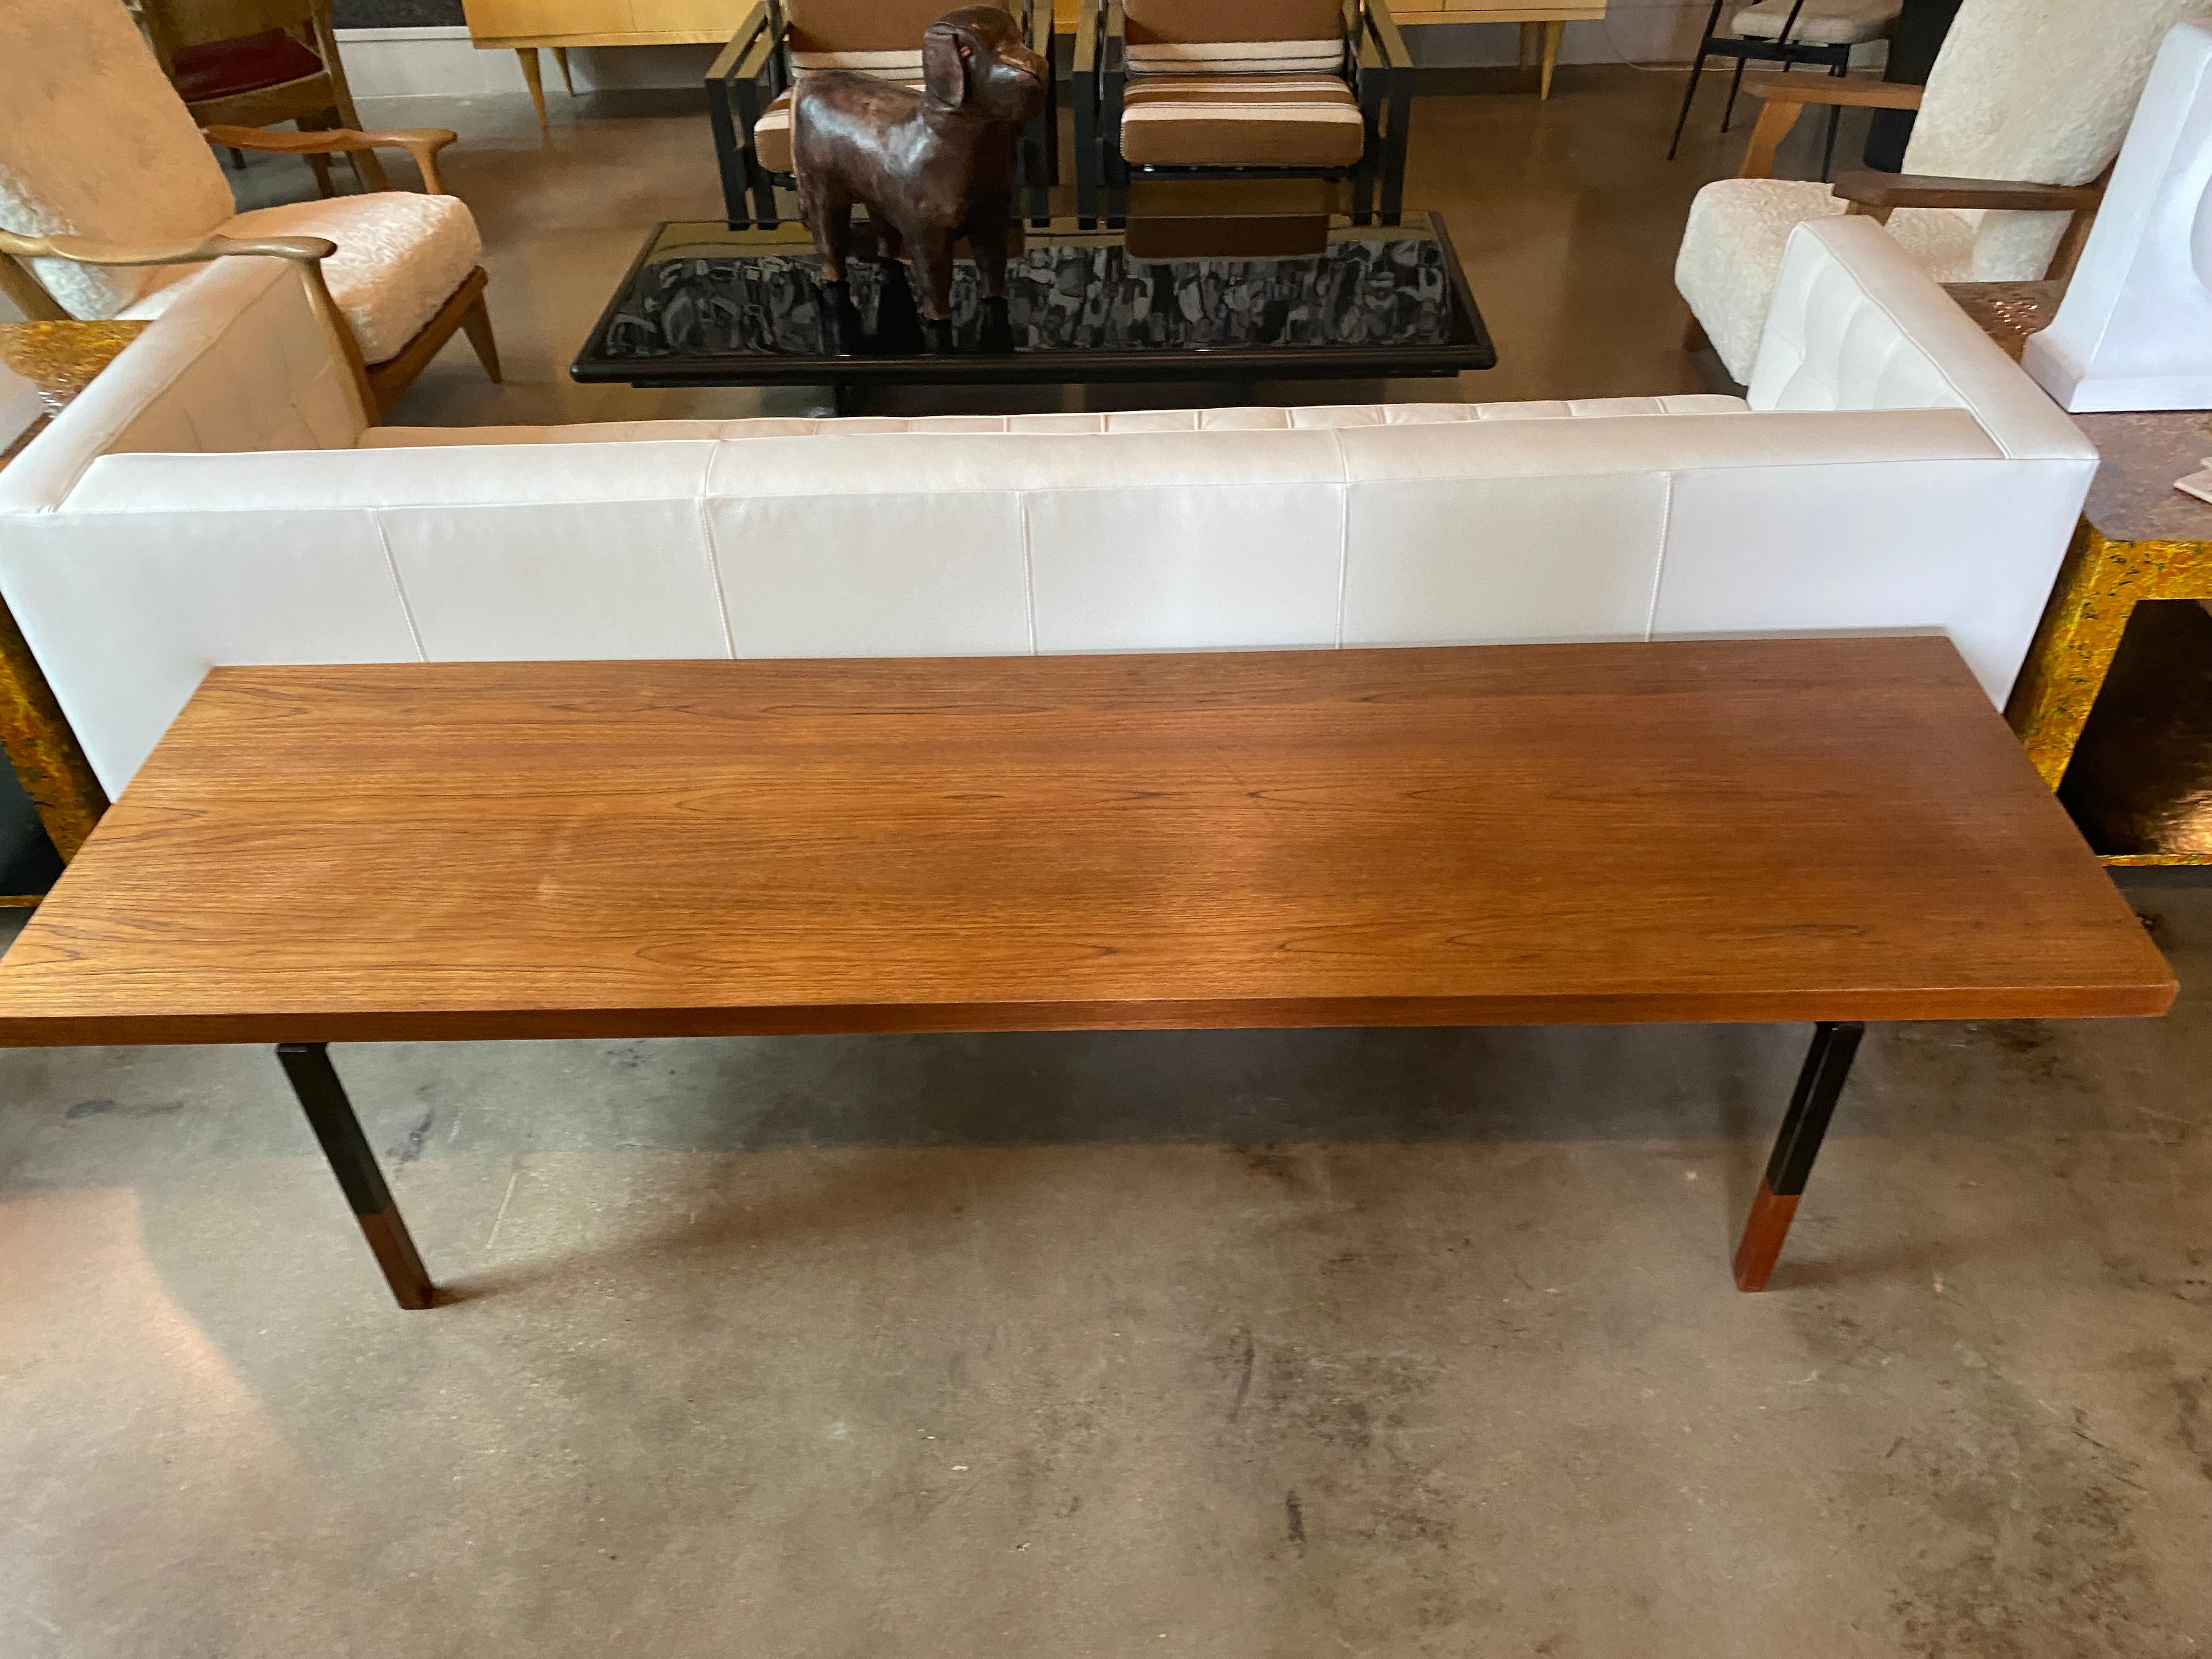 Mid-20th Century Wood and Steel Mid-Century Table or Bench, Denmark, 1950's For Sale